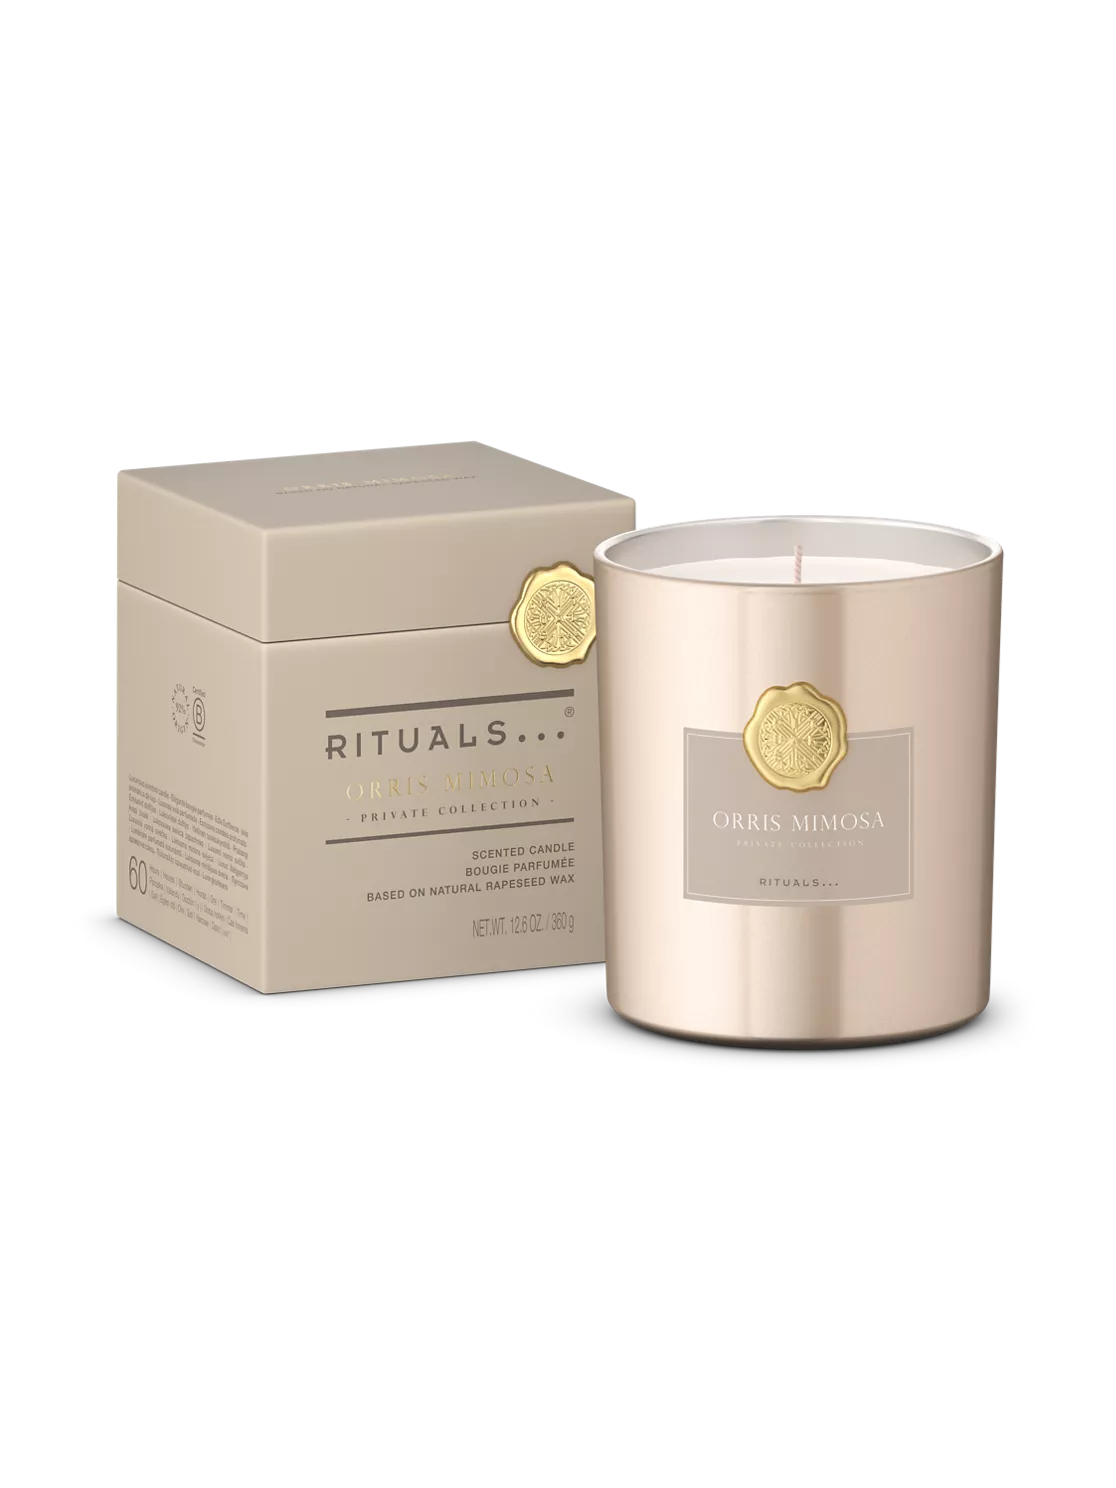 RITUALS® Orris Mimosa - Luxury scented candle